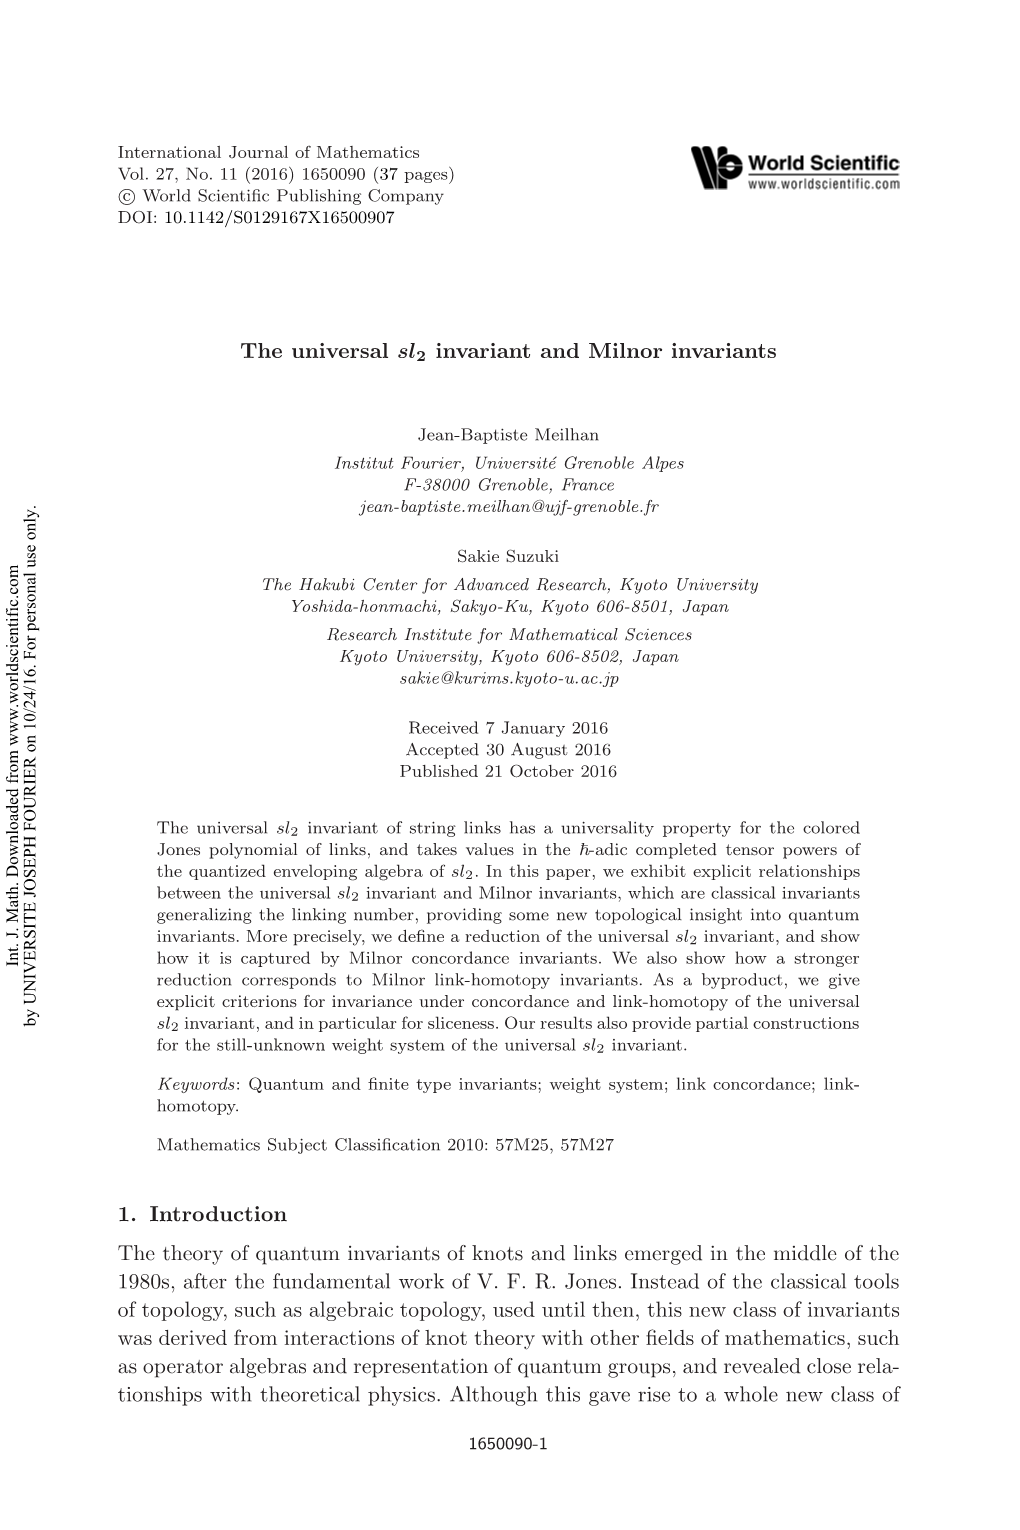 The Universal Sl2 Invariant and Milnor Invariants